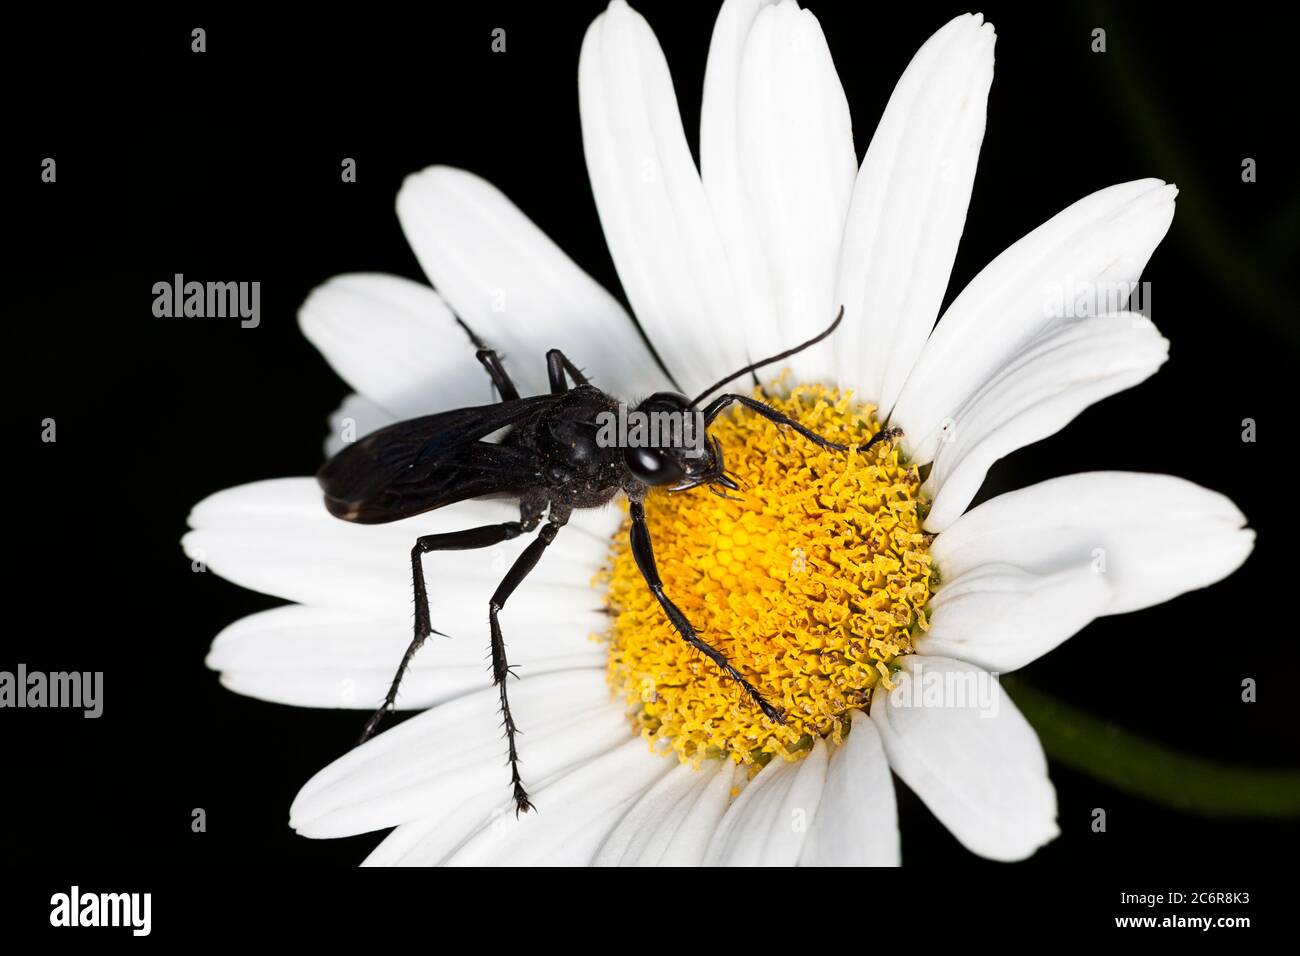 A great black wasp searches for necter on a shasta daisy. The white petals stand out on the black background. Stock Photo